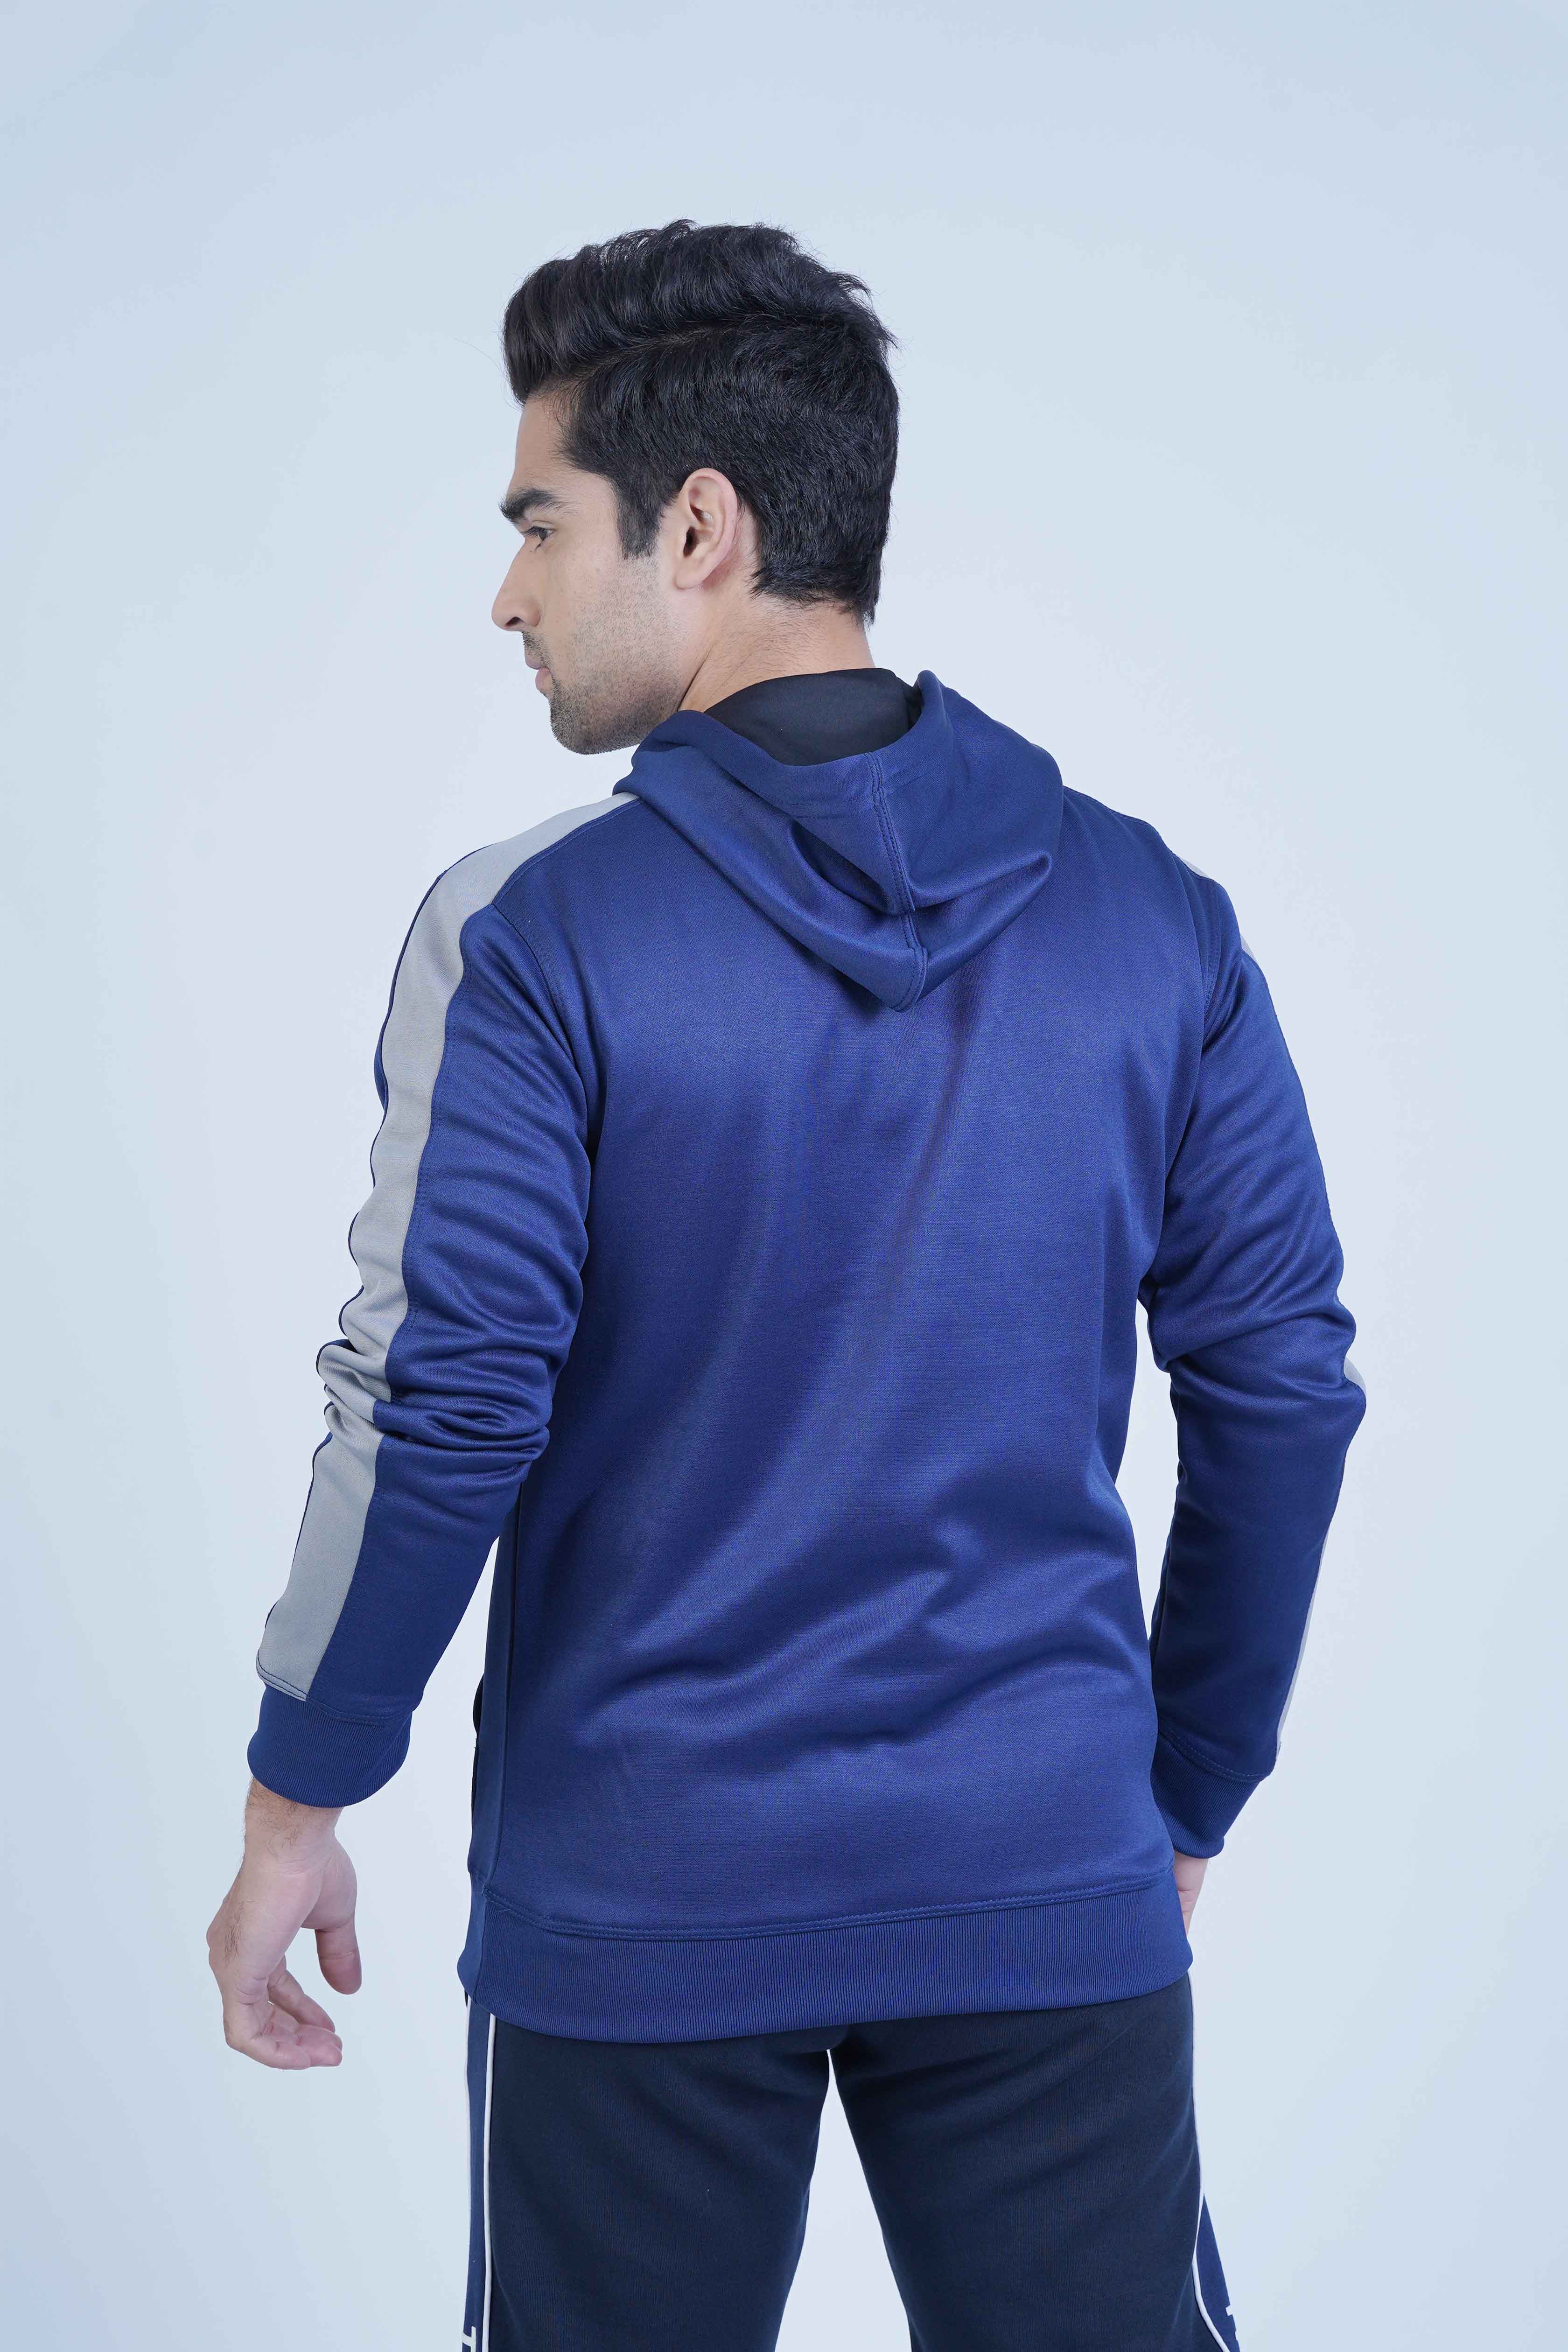 Discover Comfort in Style: The Xea Positive Navy Blue Grey Hoodie